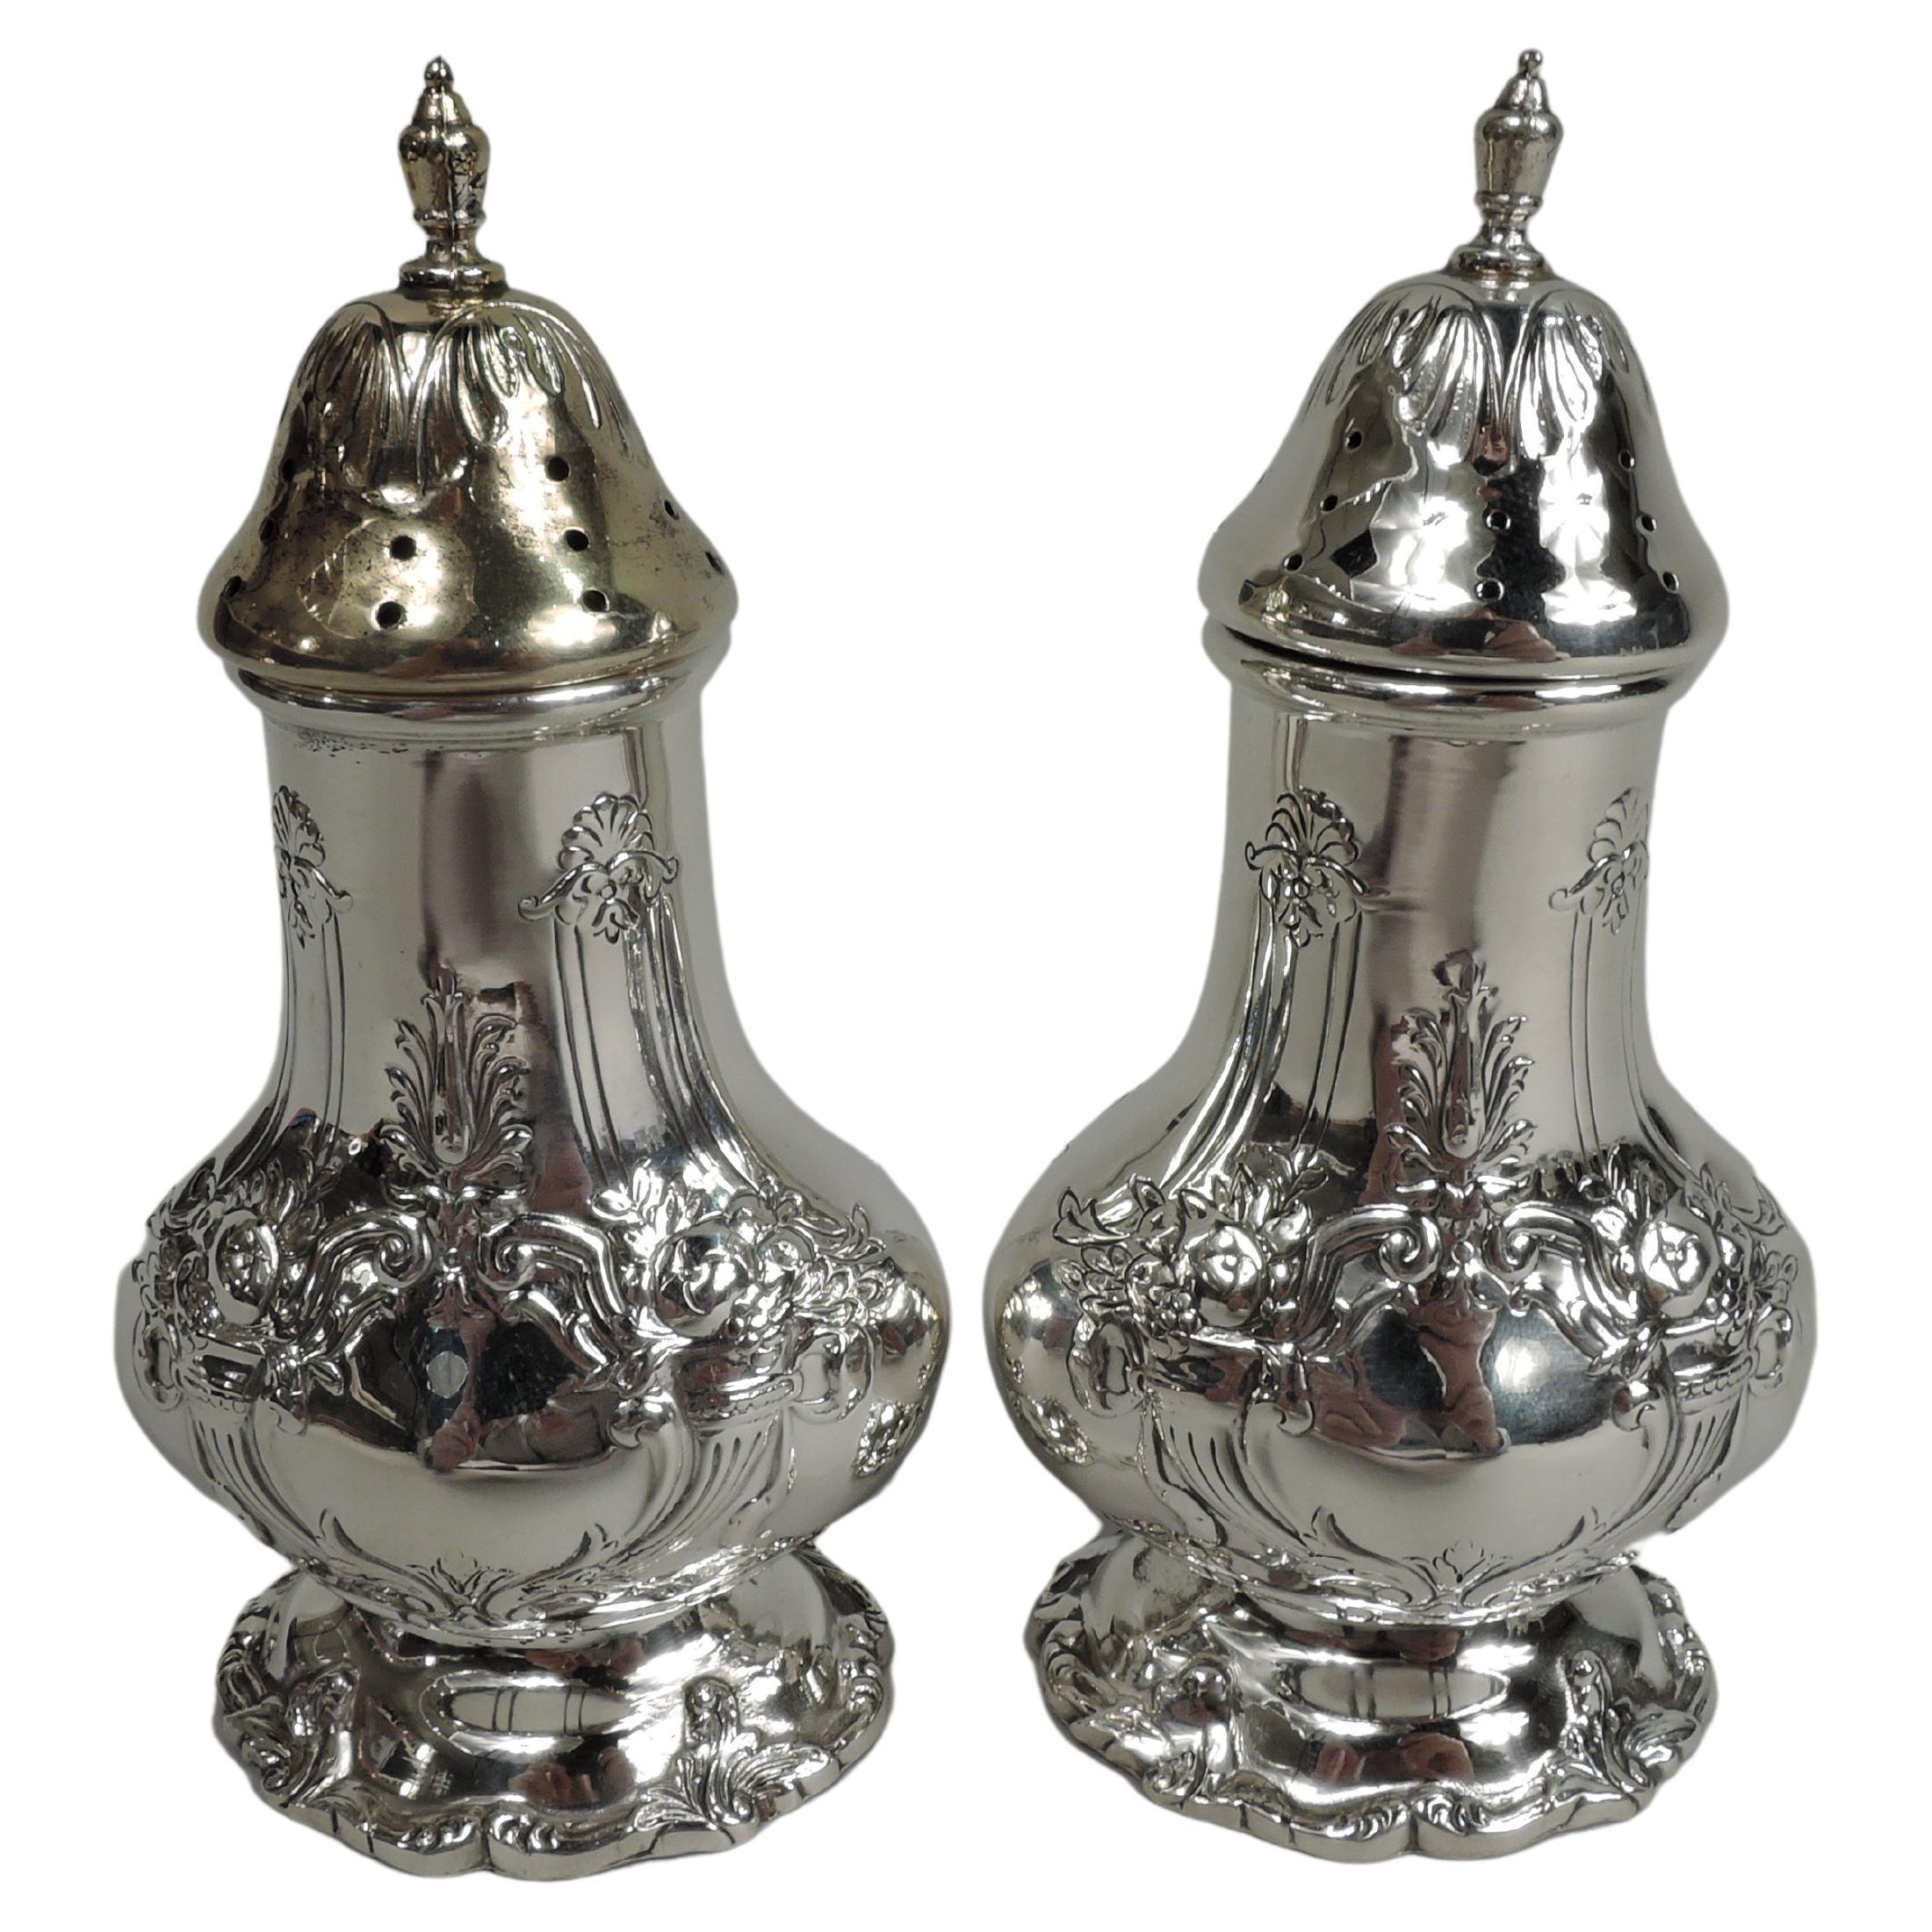 Pair of Reed & Barton Francis I Sterling Silver Salt & Pepper Shakers